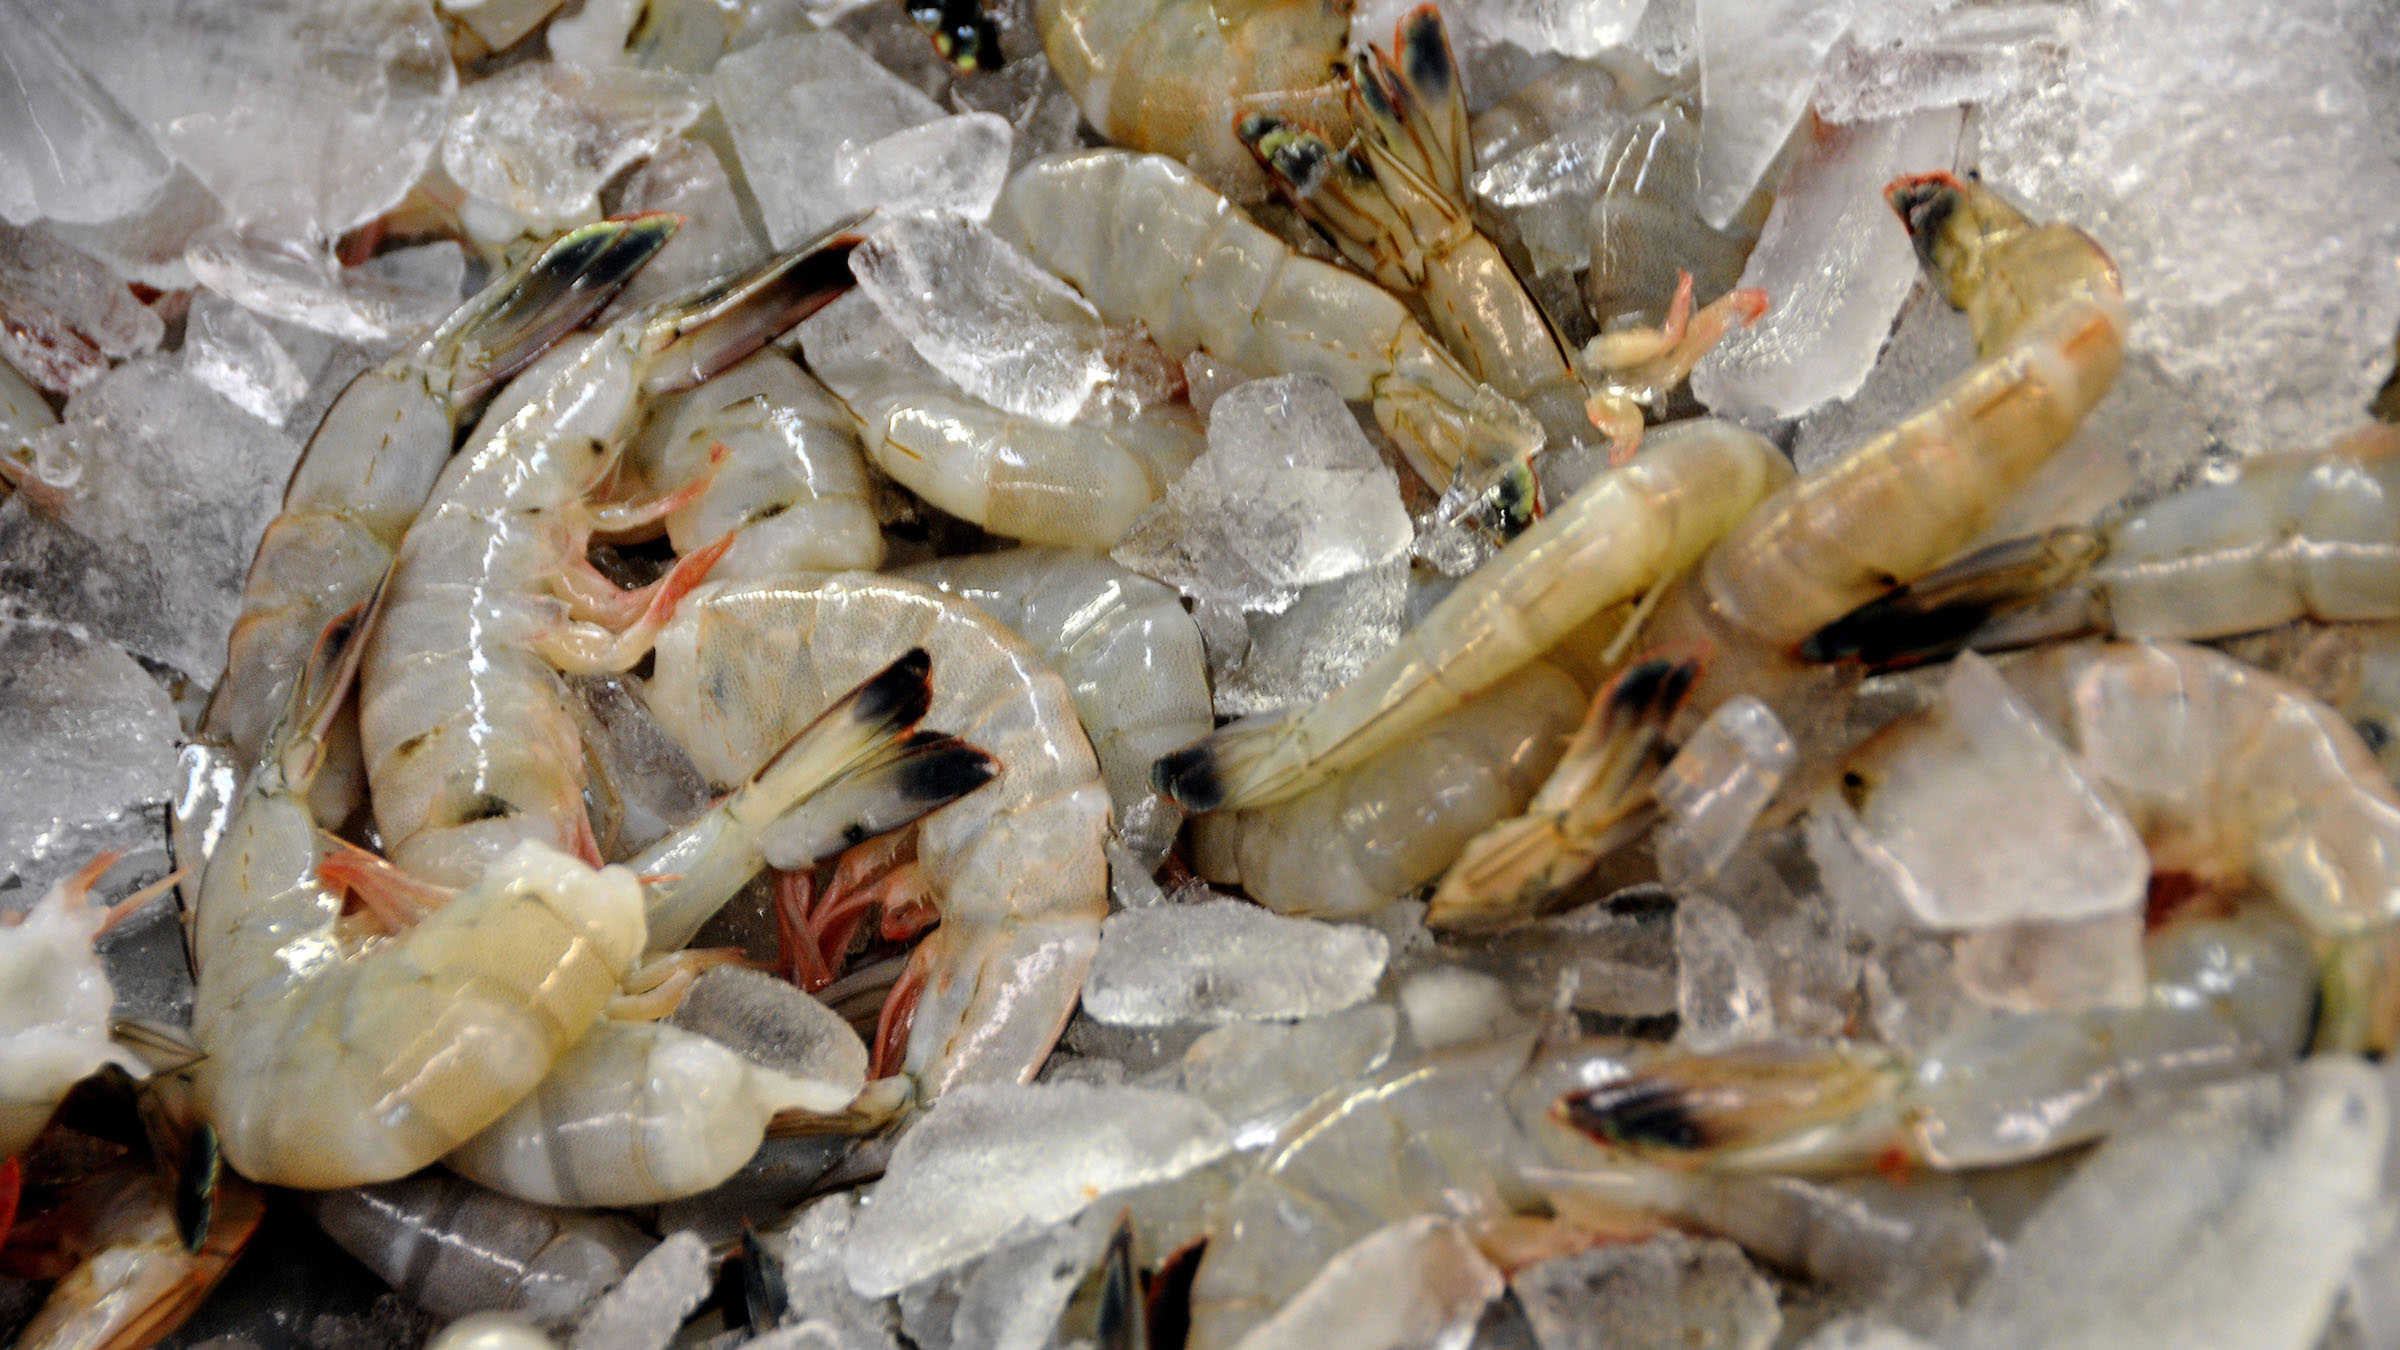 Fresh caught shrimp on ice at Capt'n Pete's Seafood Market in Holden Beach, North Carolina.